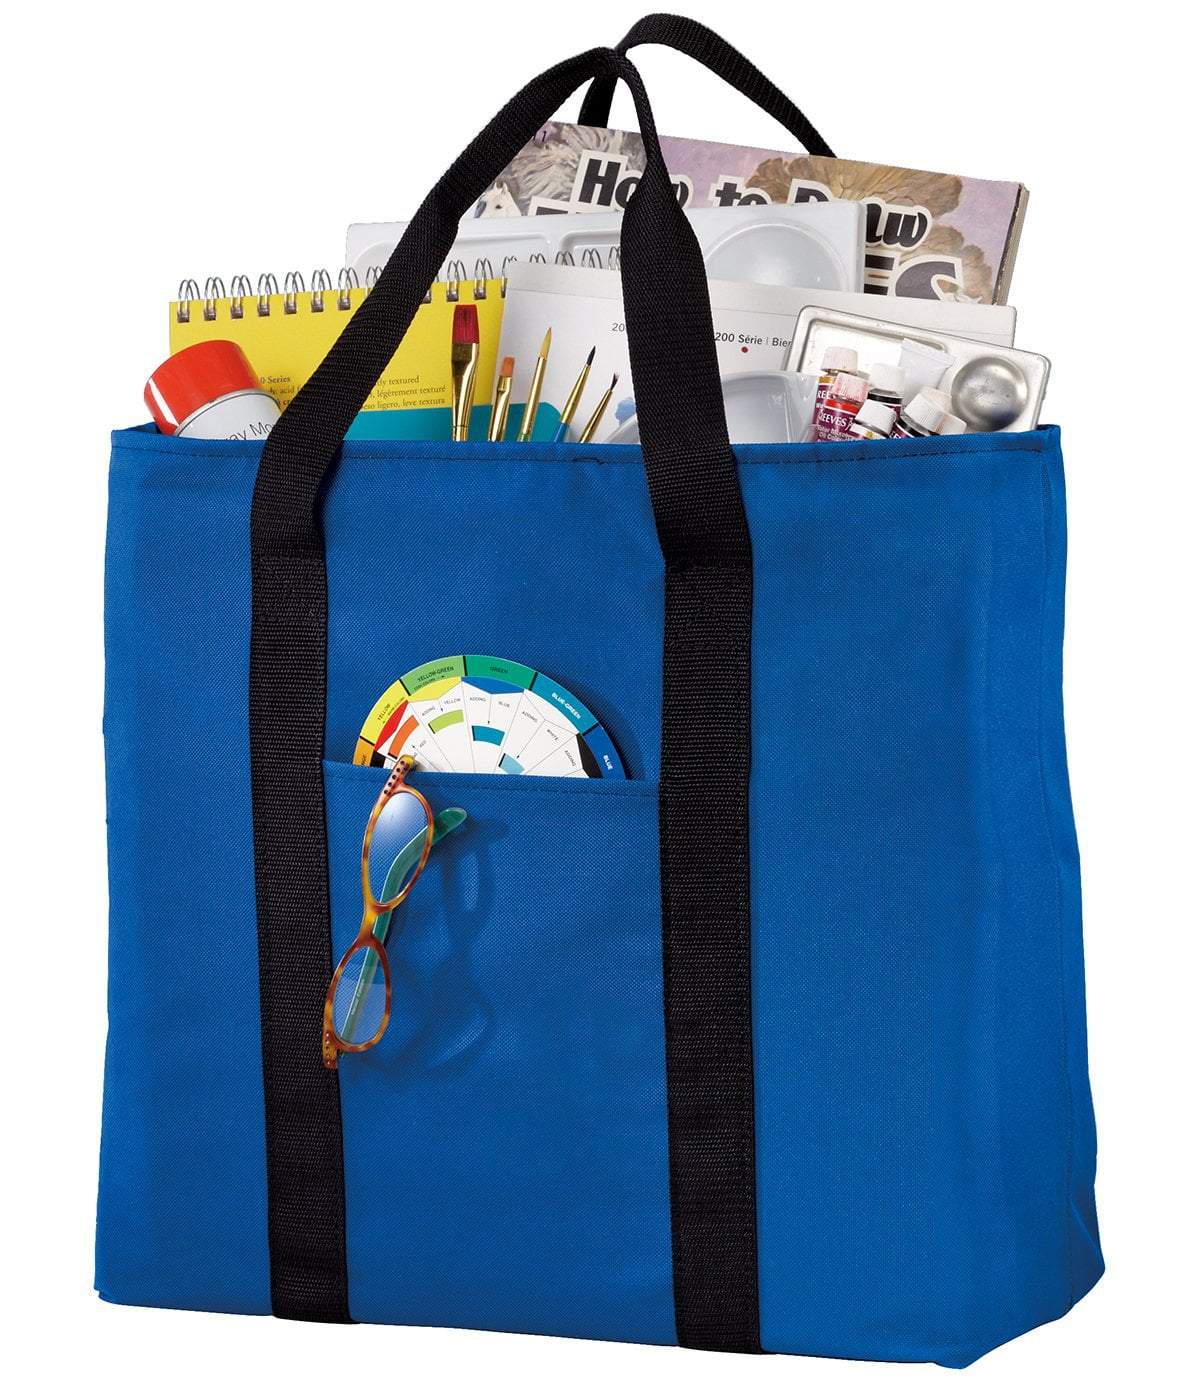 LCRestore Garment bag up-cycle Canvas Tote